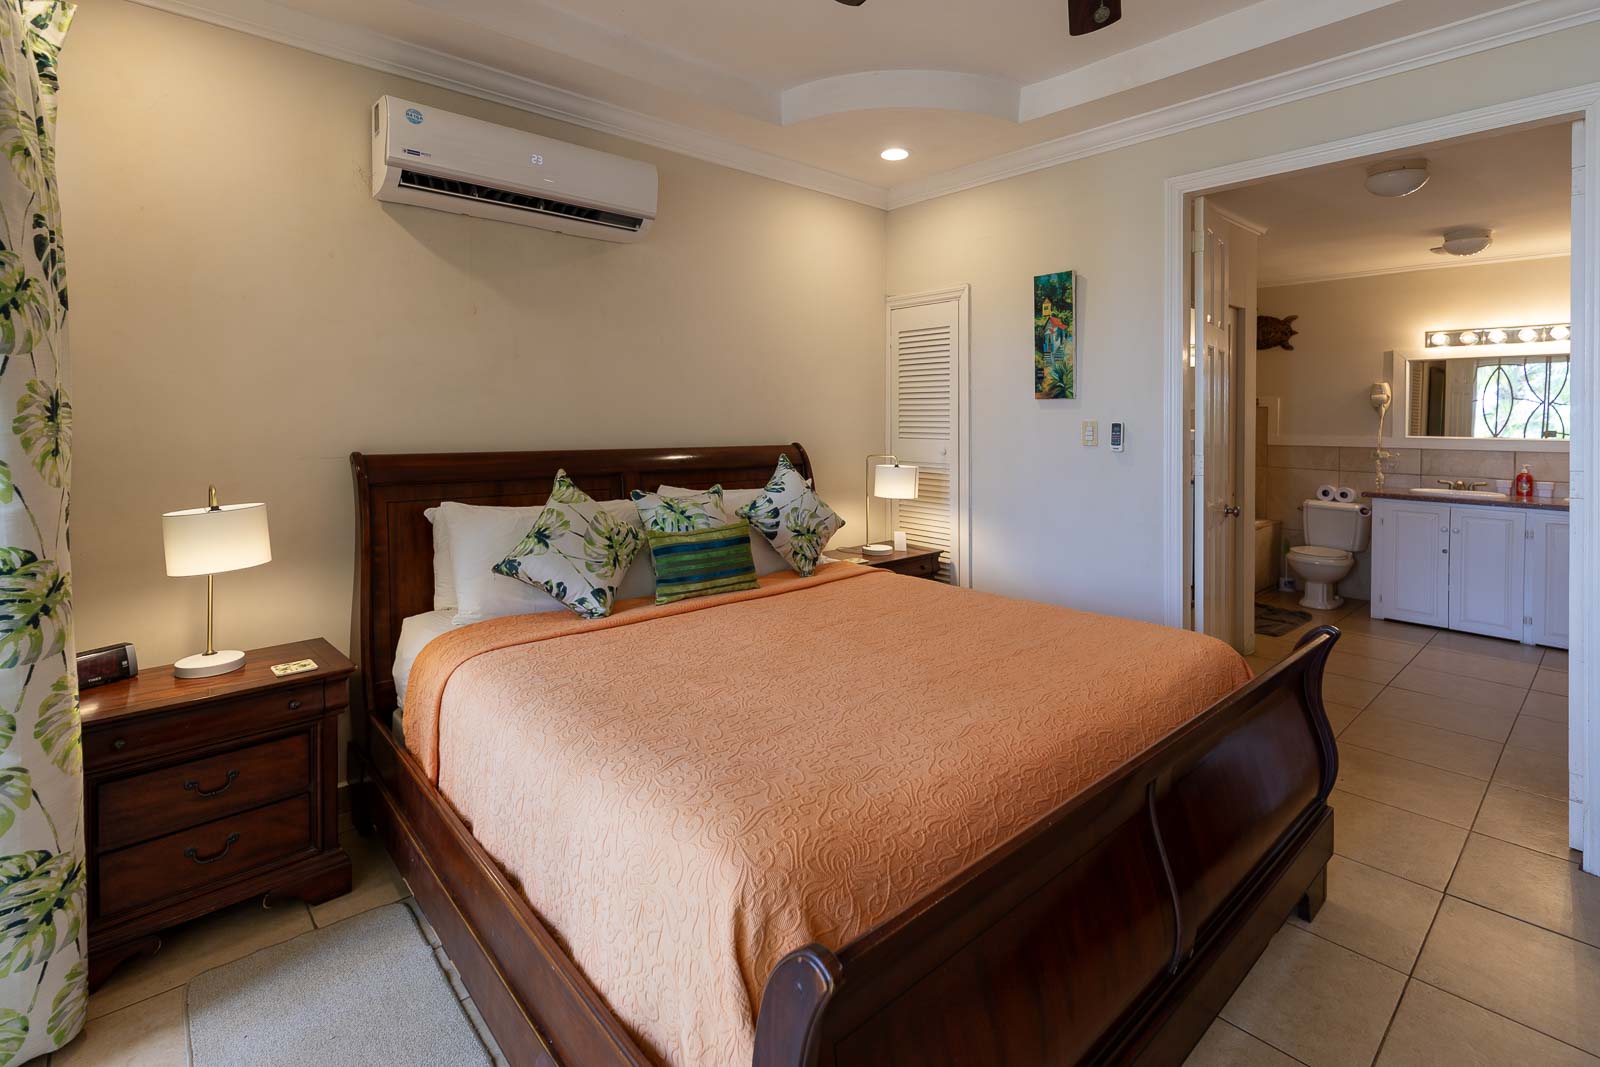 Chaconia Suite at Black Rock Dreams self-catering vacation rental